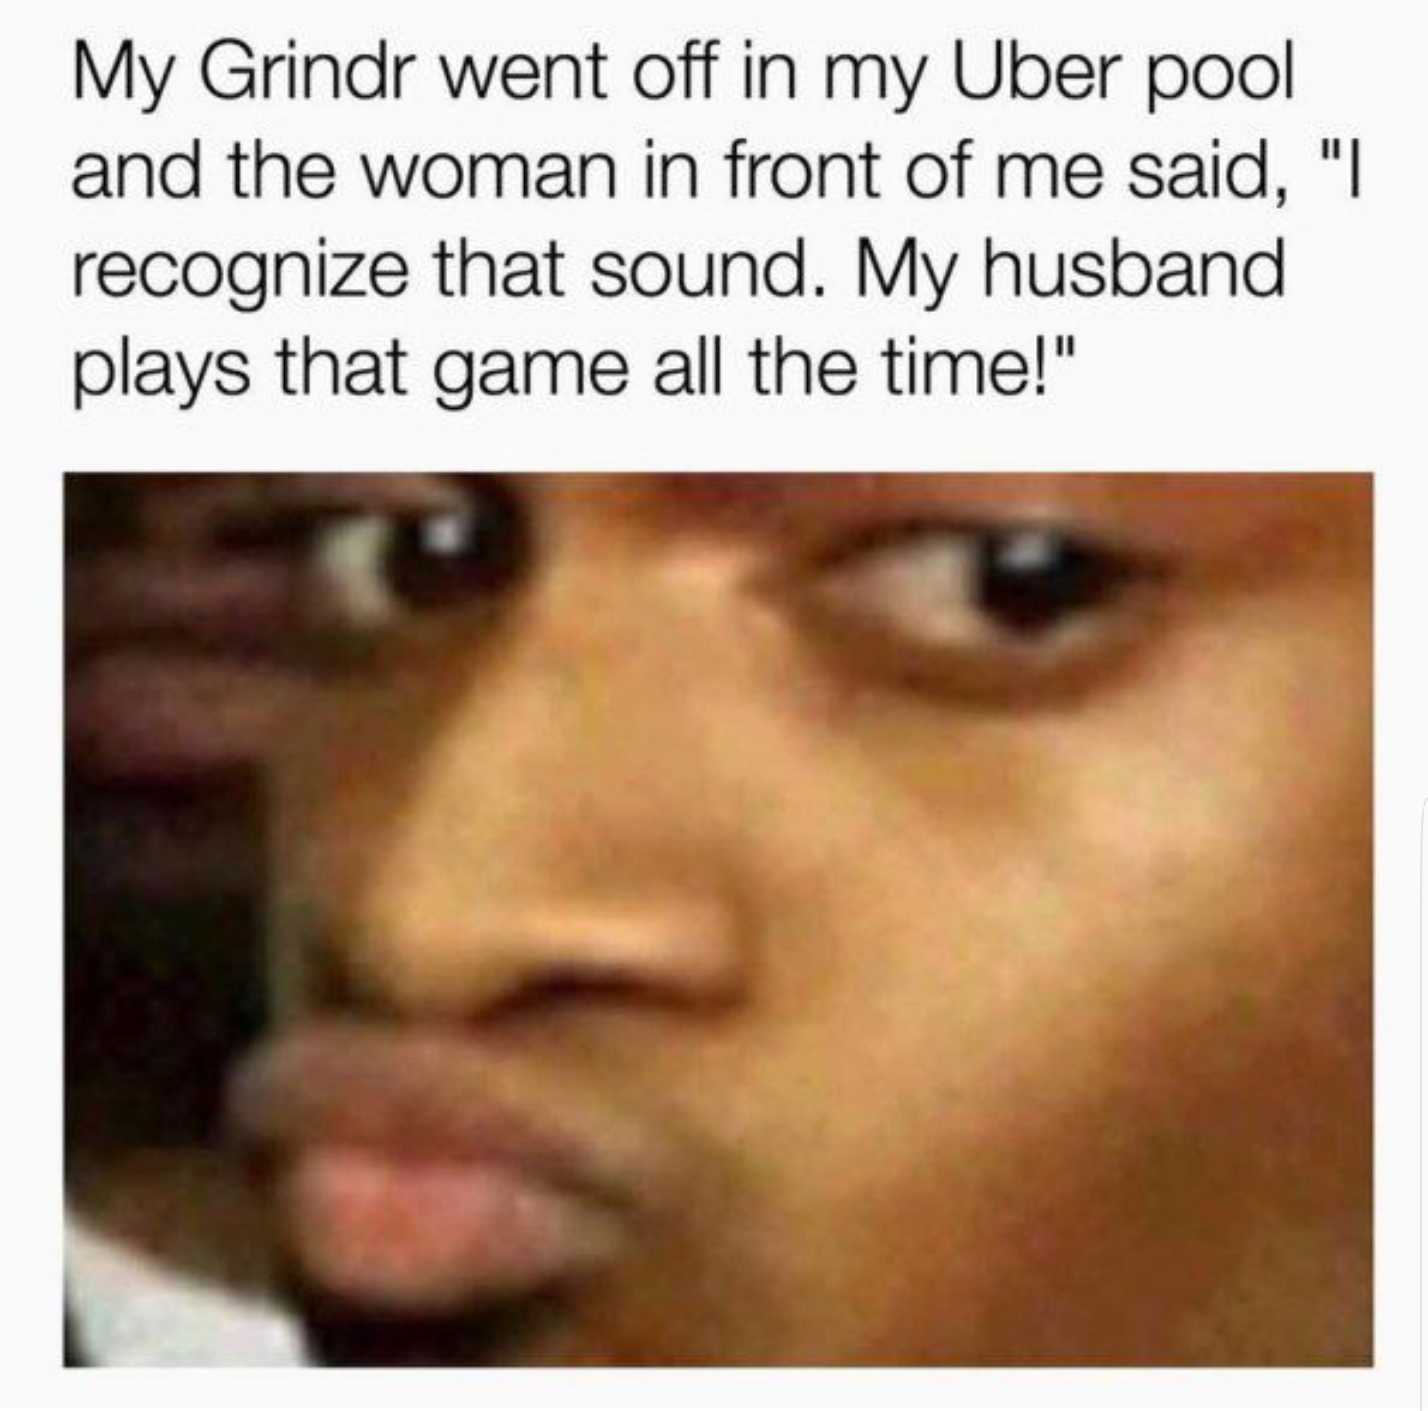 funny picture of a grindr meme - My Grindr went off in my Uber pool and the woman in front of me said, "I recognize that sound. My husband plays that game all the time!"